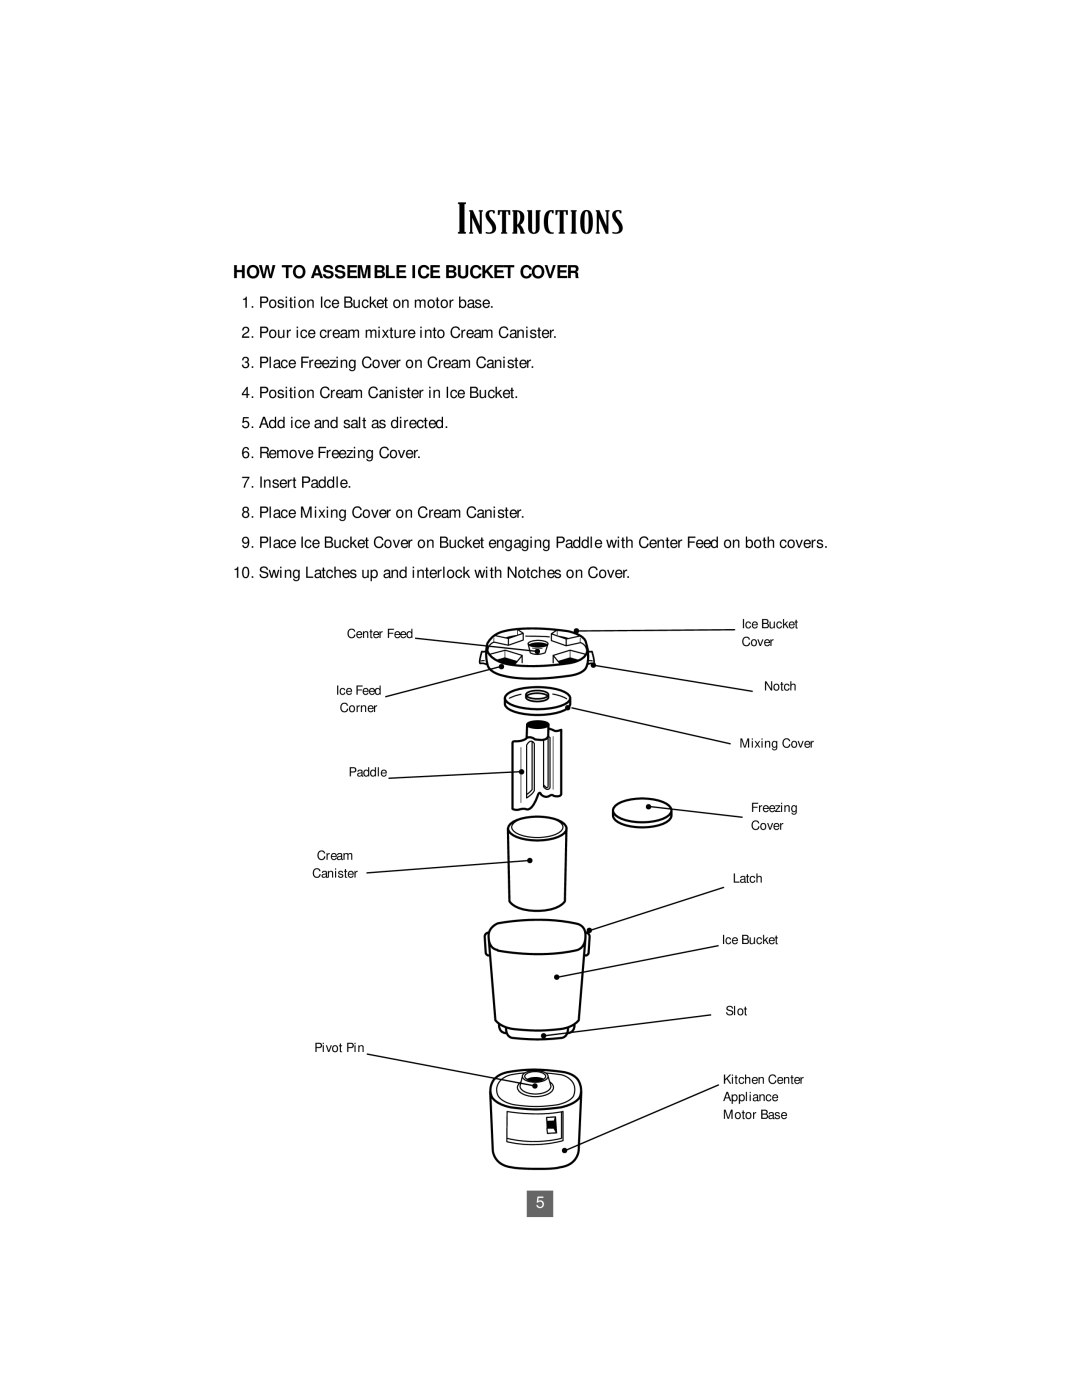 Oster 4746 instruction manual Instructions, HOW to Assemble ICE Bucket Cover 